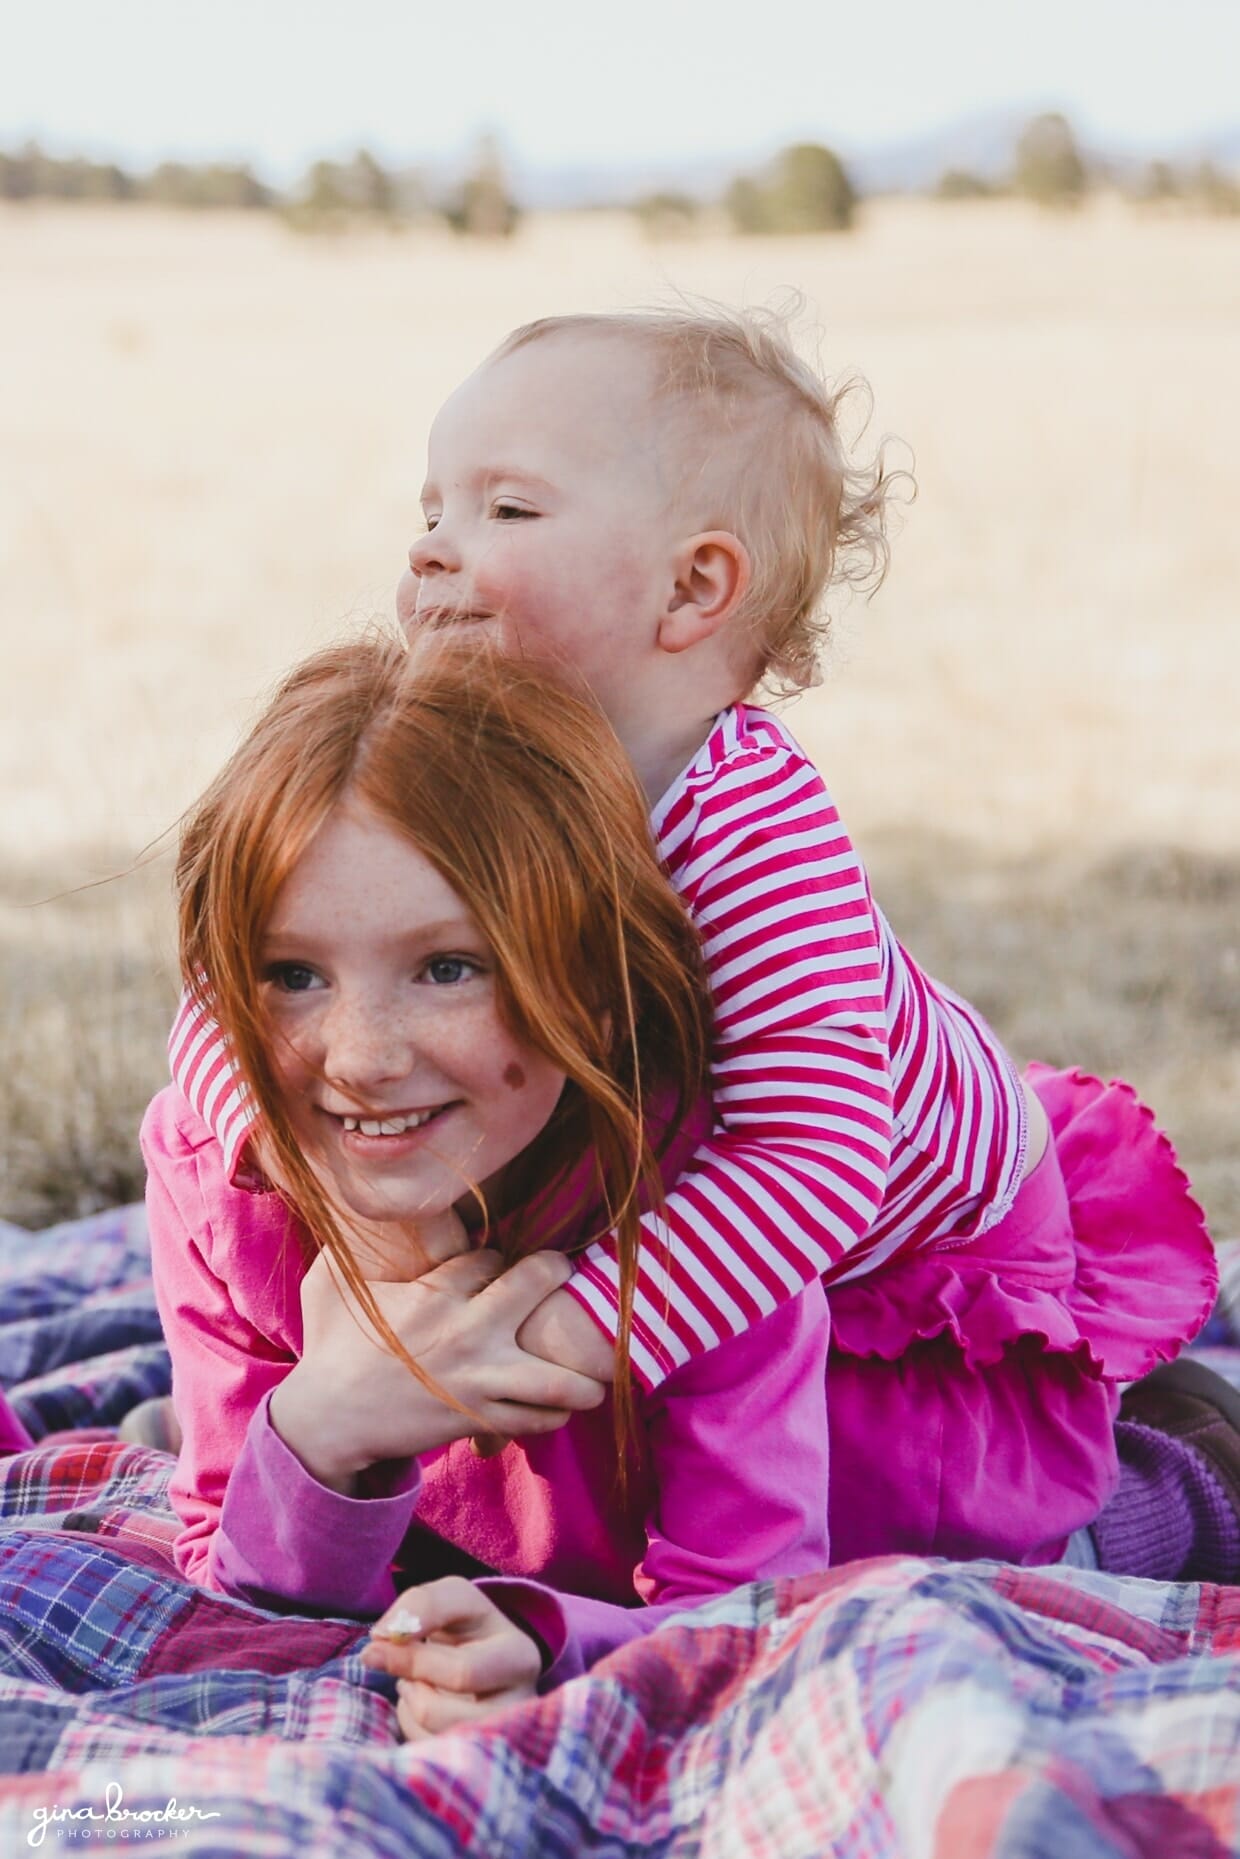 A toddler sits on her sisters back during a fun photo session in a field